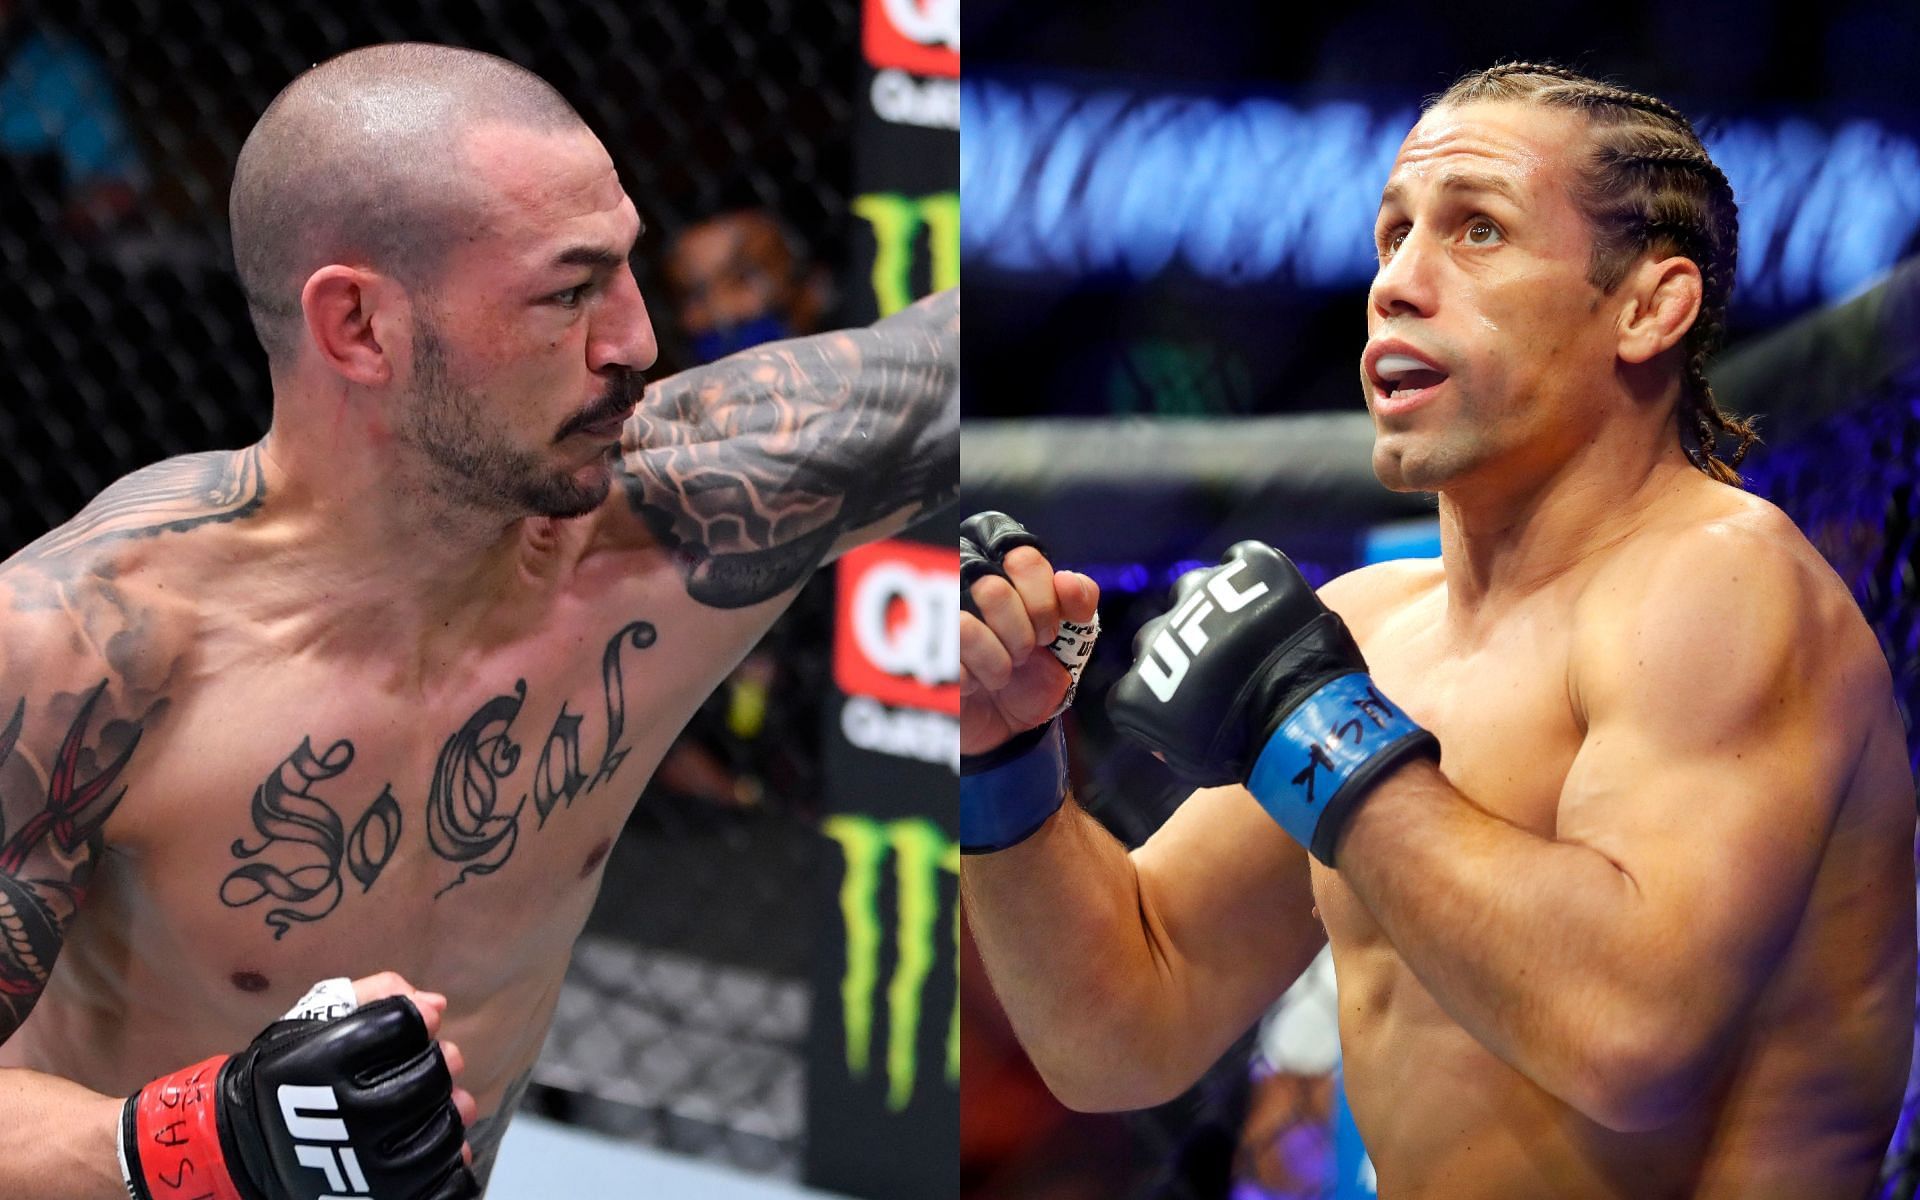 Cub Swanson (left) and Urijah Faber (right) (Images via Getty)